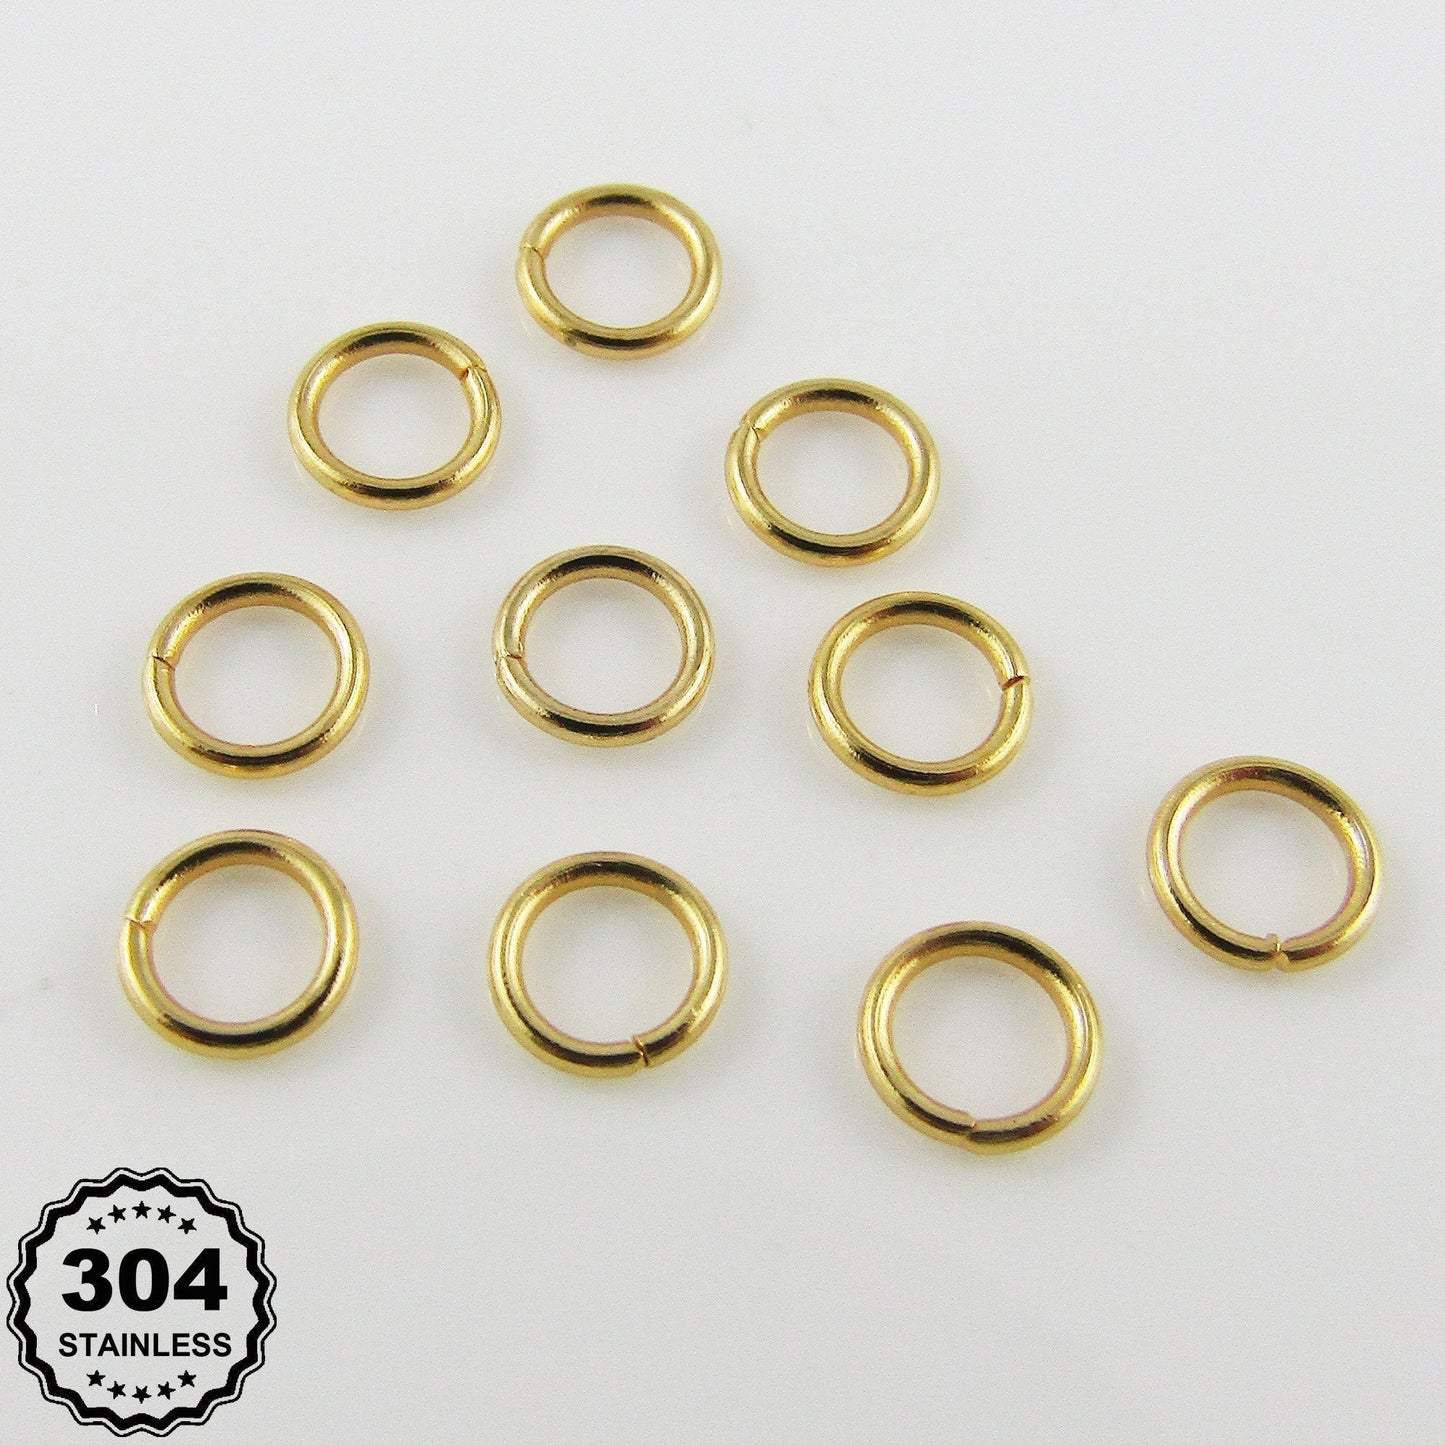 10 pcs Bulk 18k Gold Plated Stainless Steel 5mm Open Jump Rings Findings Craft